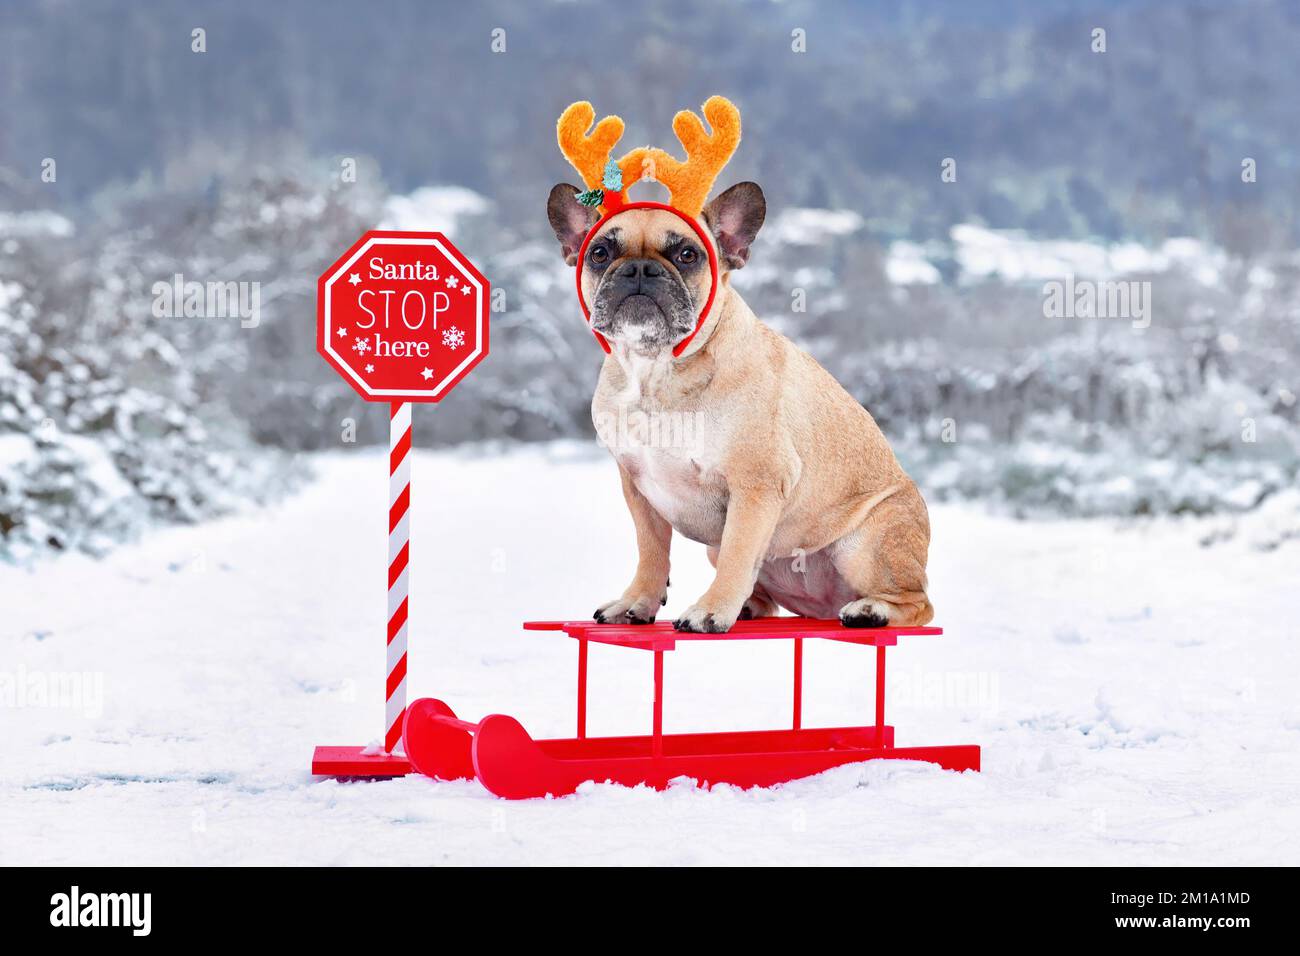 French Bulldogd dog with reindeer costume antlers sitting on sledge in winter landscape Stock Photo